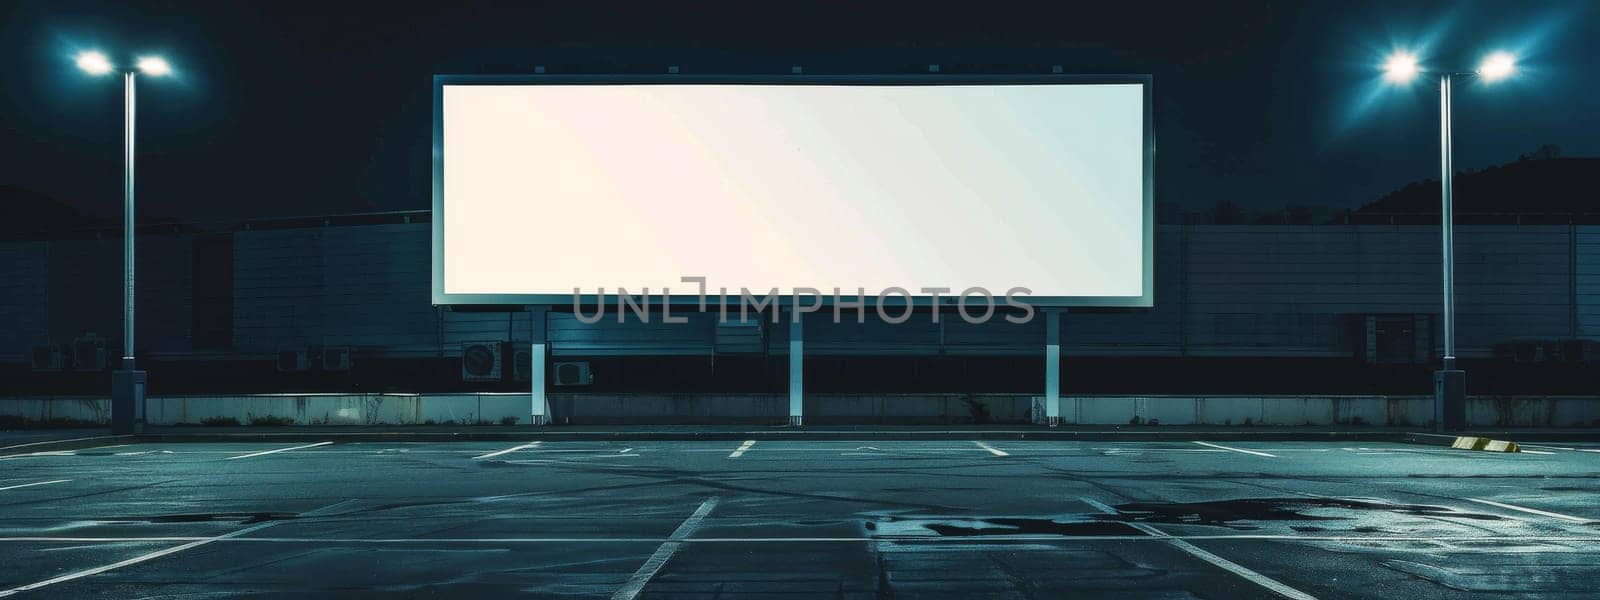 Blank white billboard on the empty parking lot during night, a place for marketing